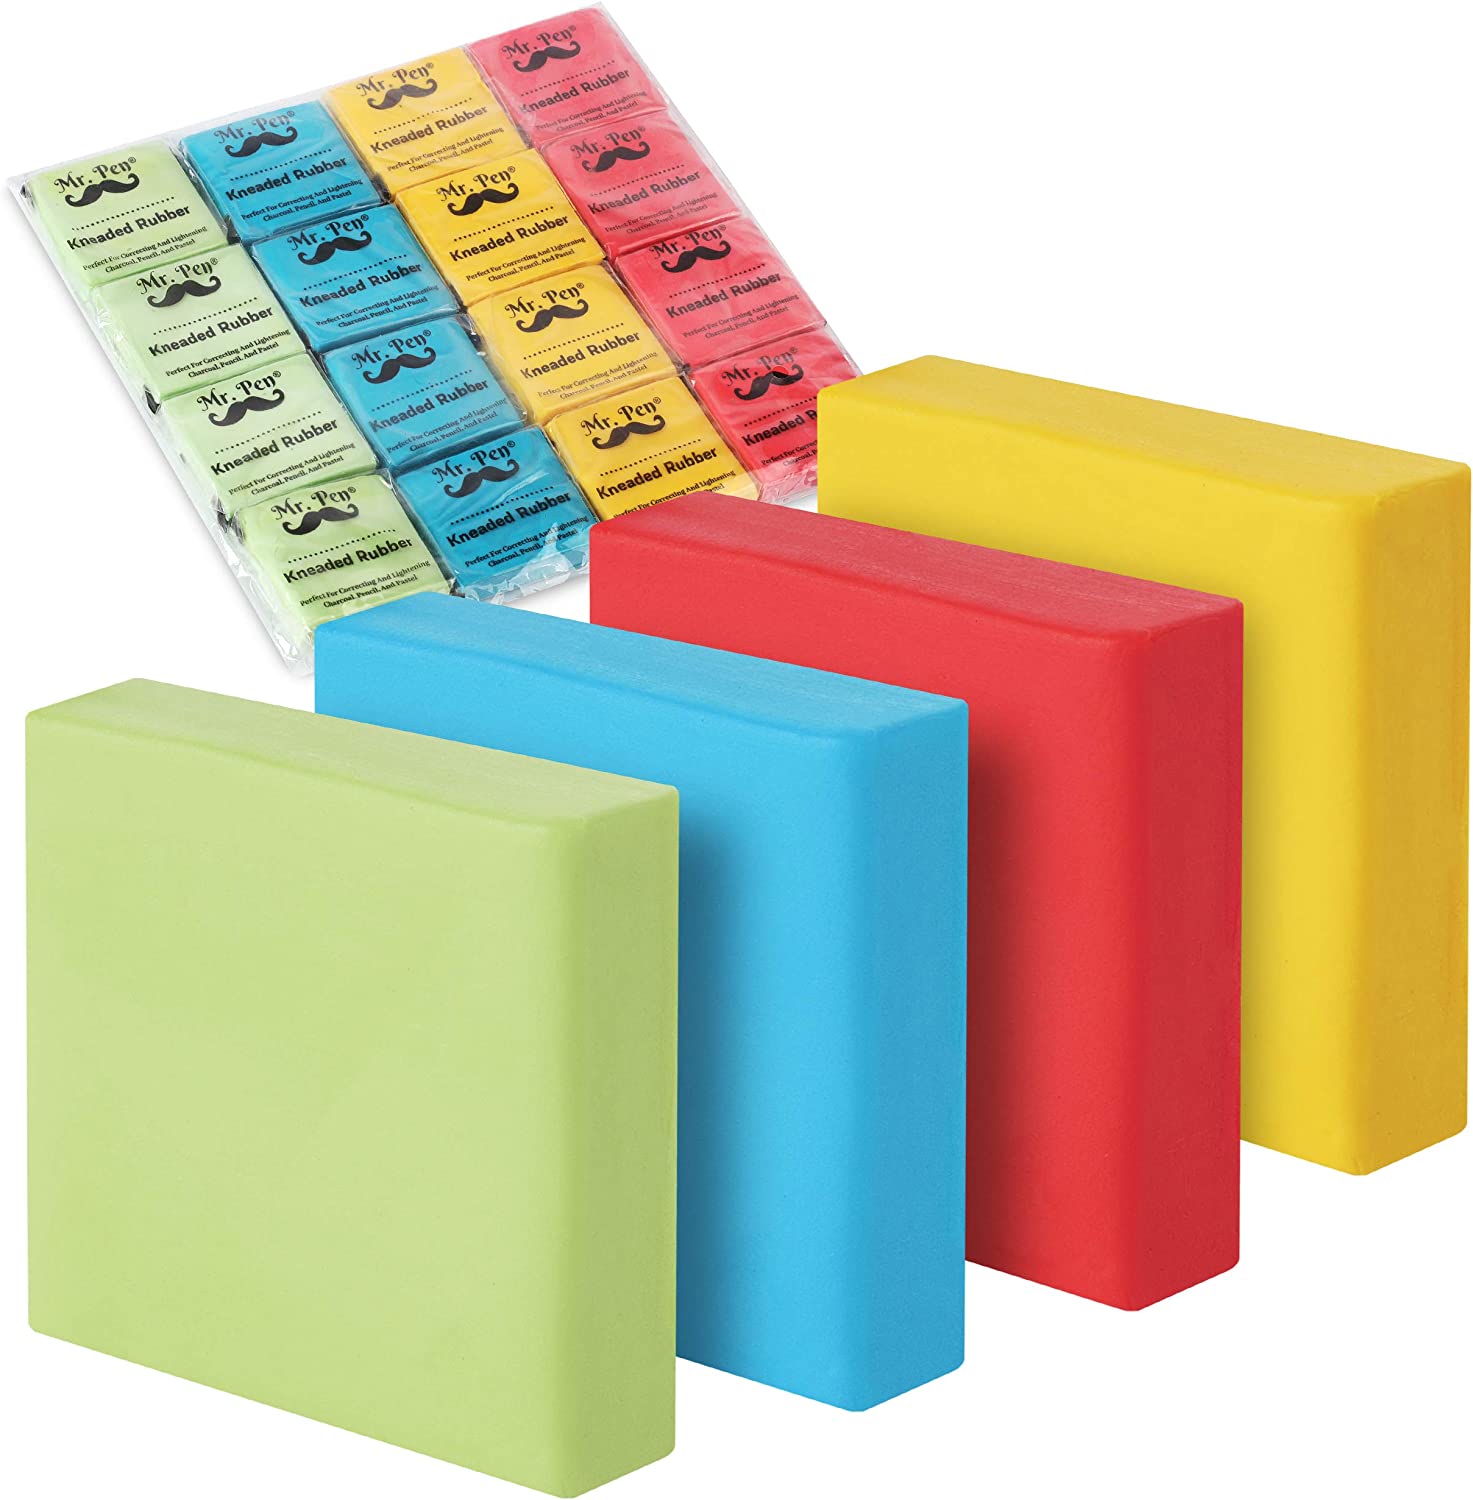 Snack Attack Scented Kneaded Erasers - 36 Pc.